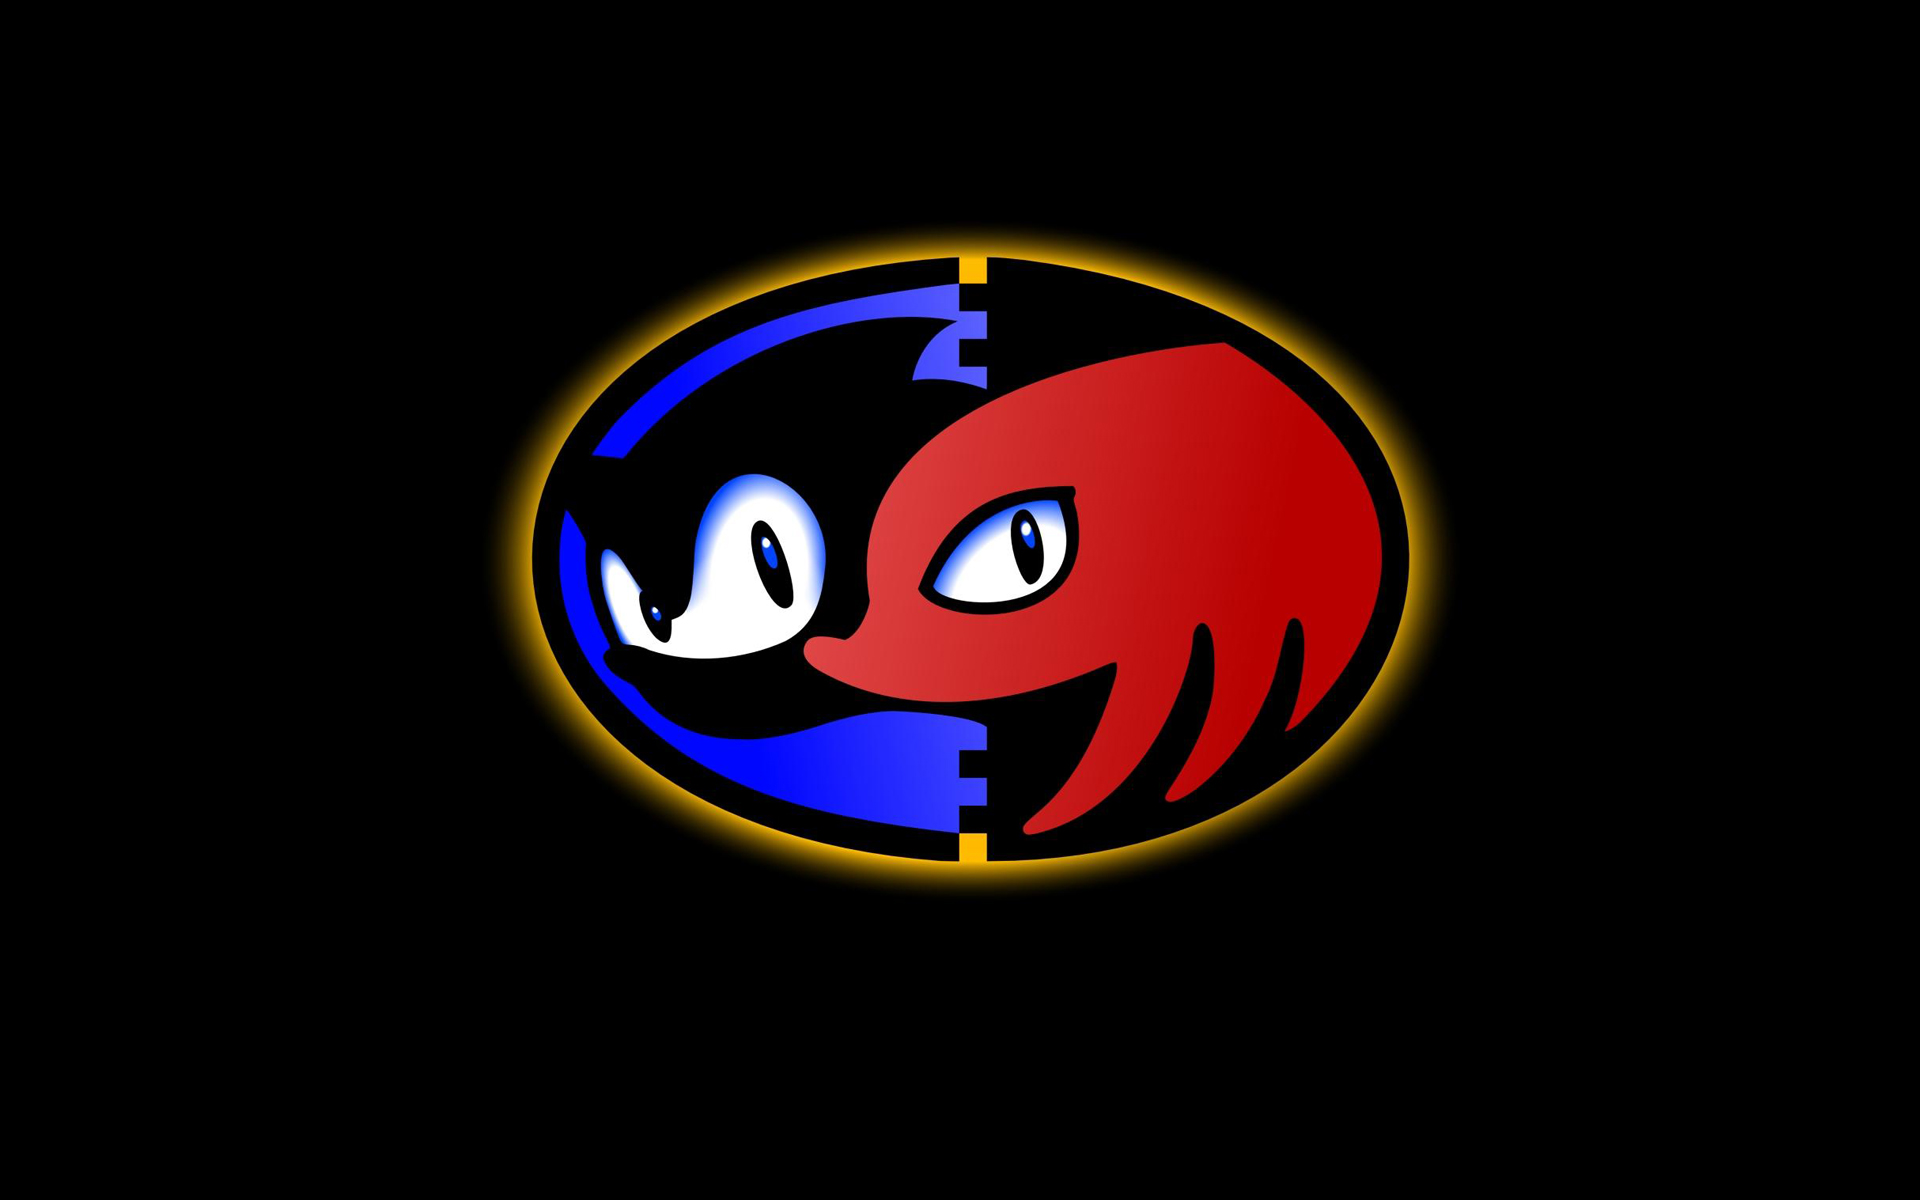 Video Game Sonic & Knuckles HD Wallpaper | Background Image